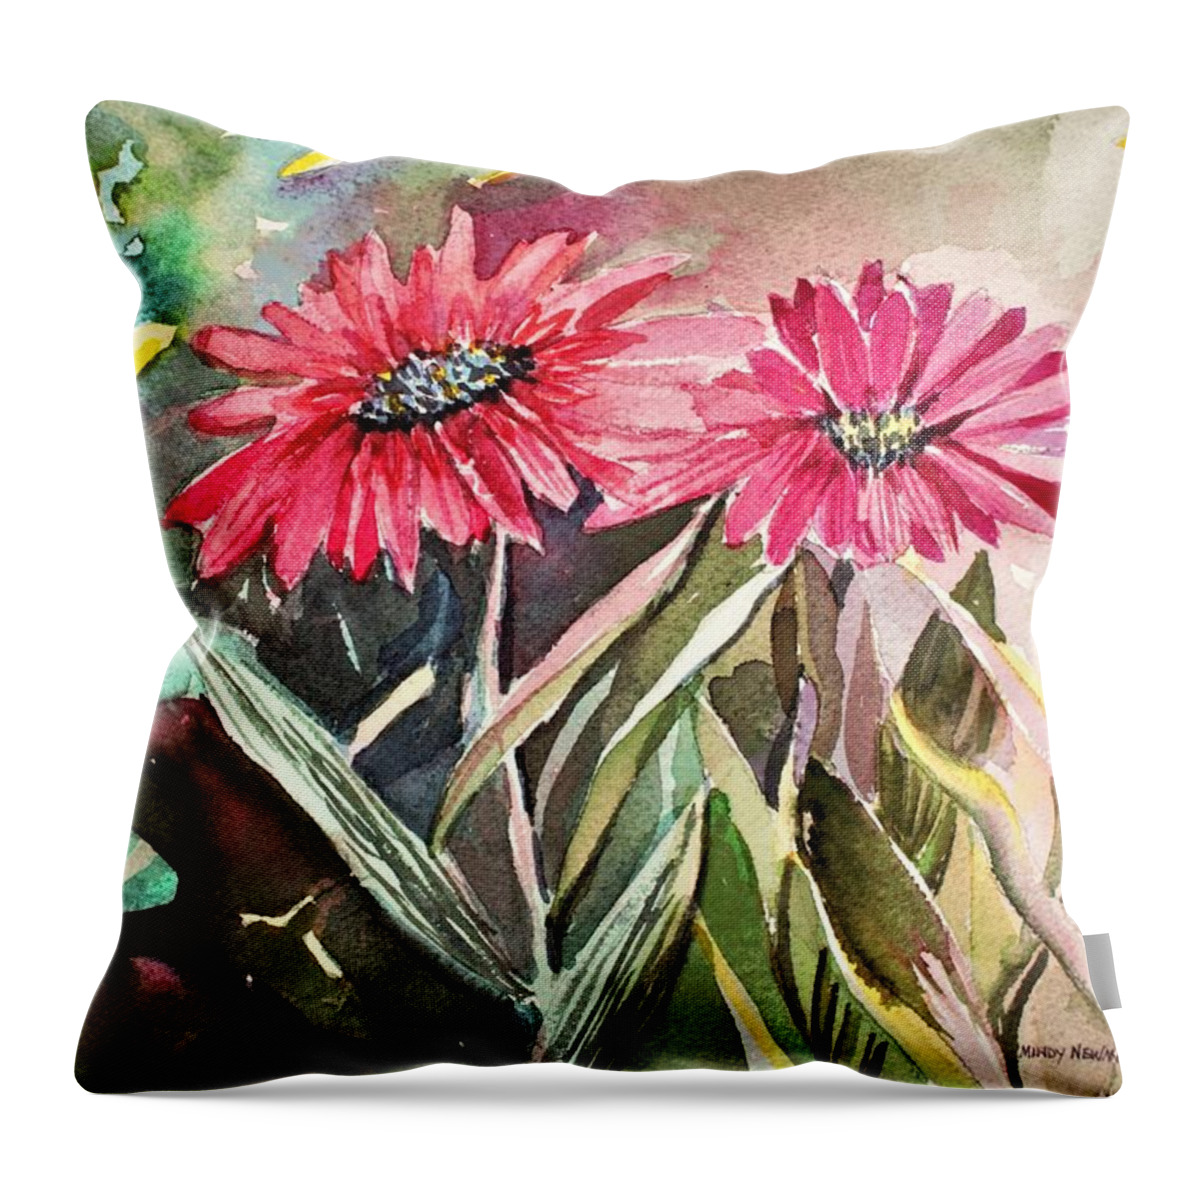 Daisy Throw Pillow featuring the painting Bright Spring Daisies by Mindy Newman